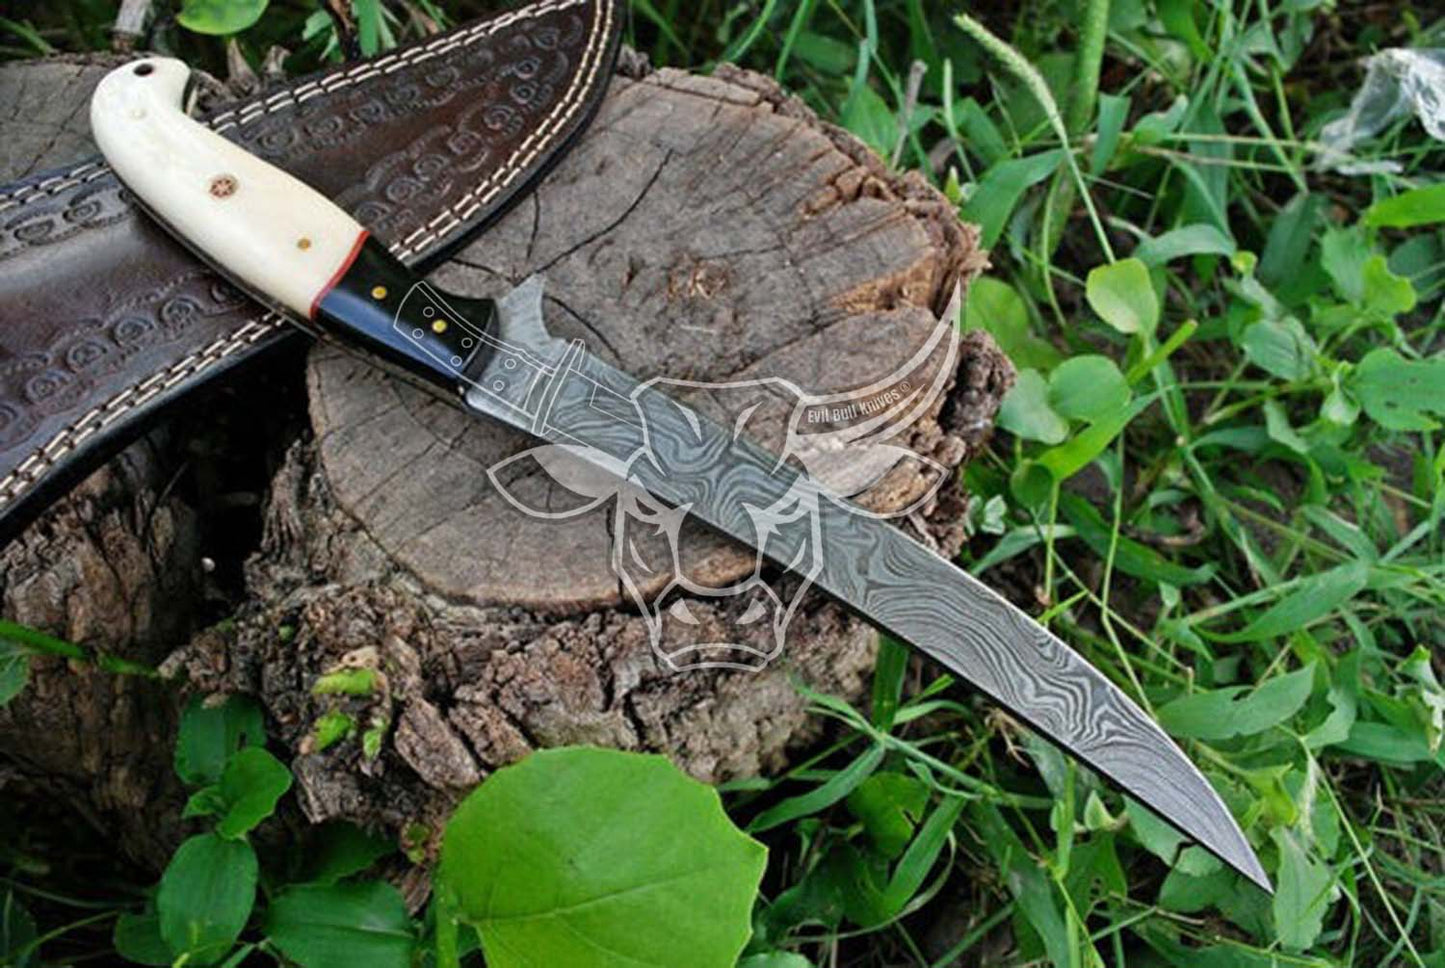 EBK-102 Handmade Damascus Fillet Knife with Wenge Wood and Bone Handle Birthday Gift, Anniversary Gift, Christmas Gift for him, Father DAY gift